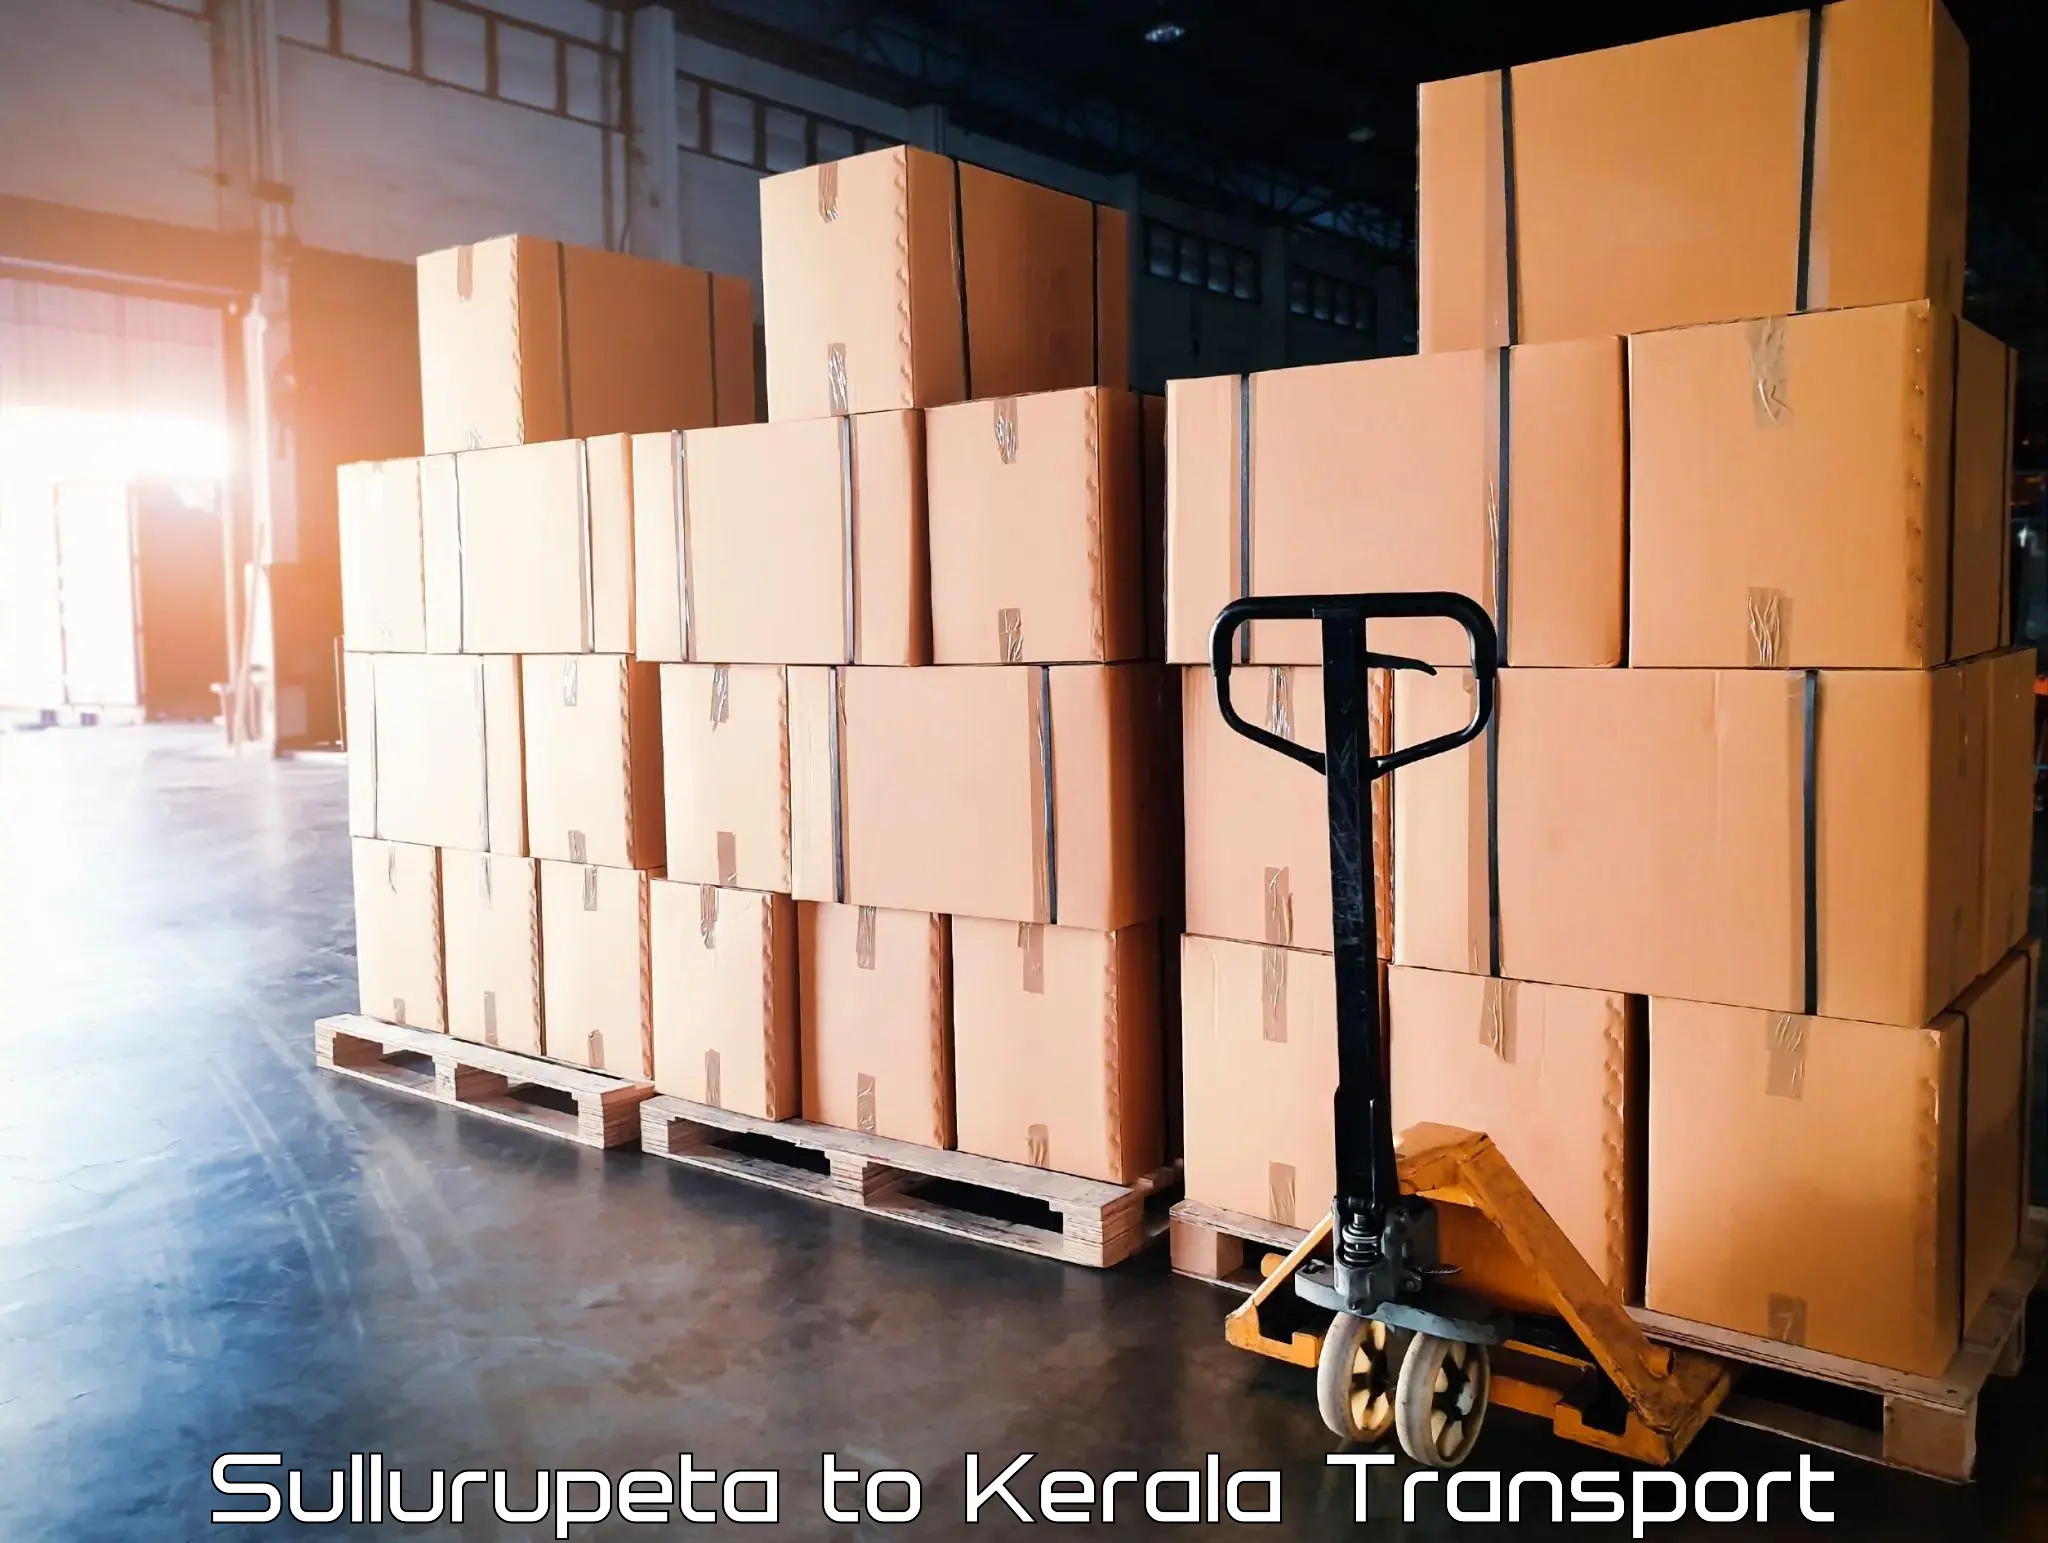 Express transport services in Sullurupeta to Cochin University of Science and Technology